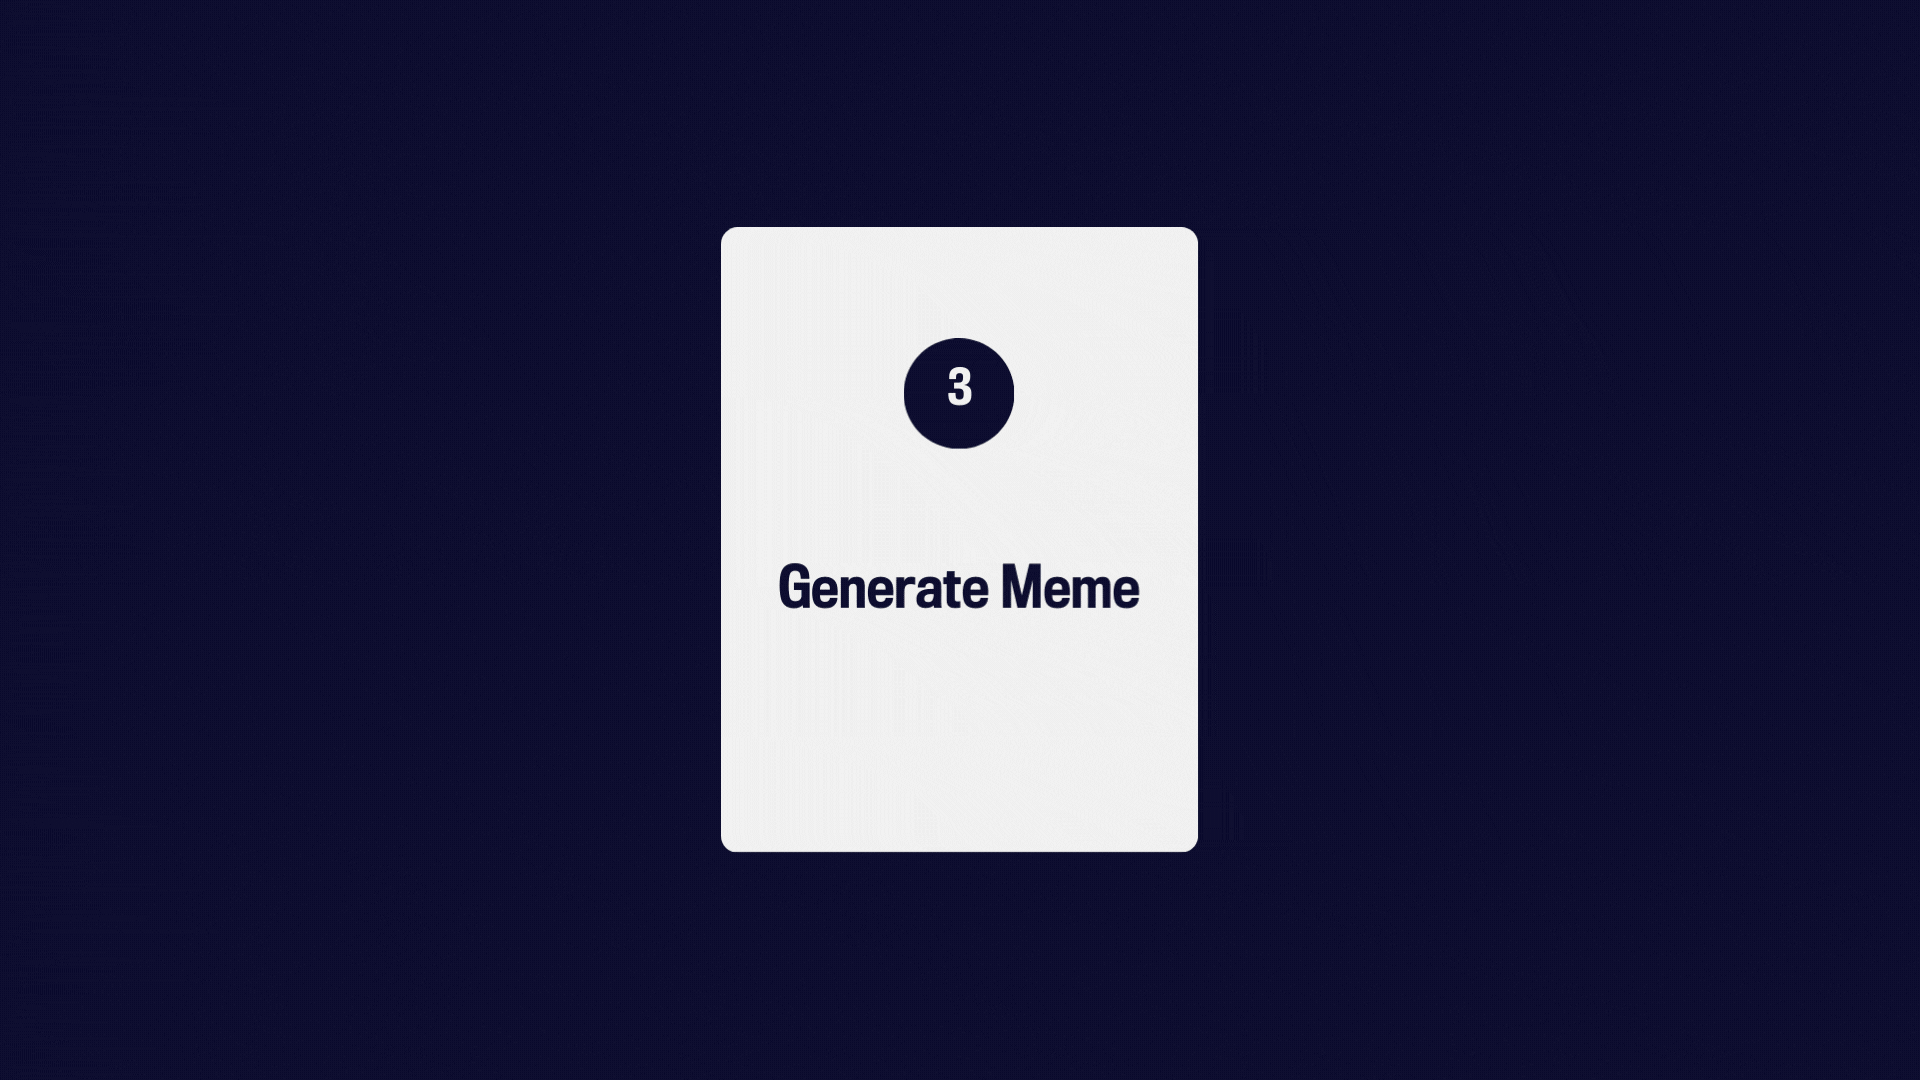 Generate and save imagee